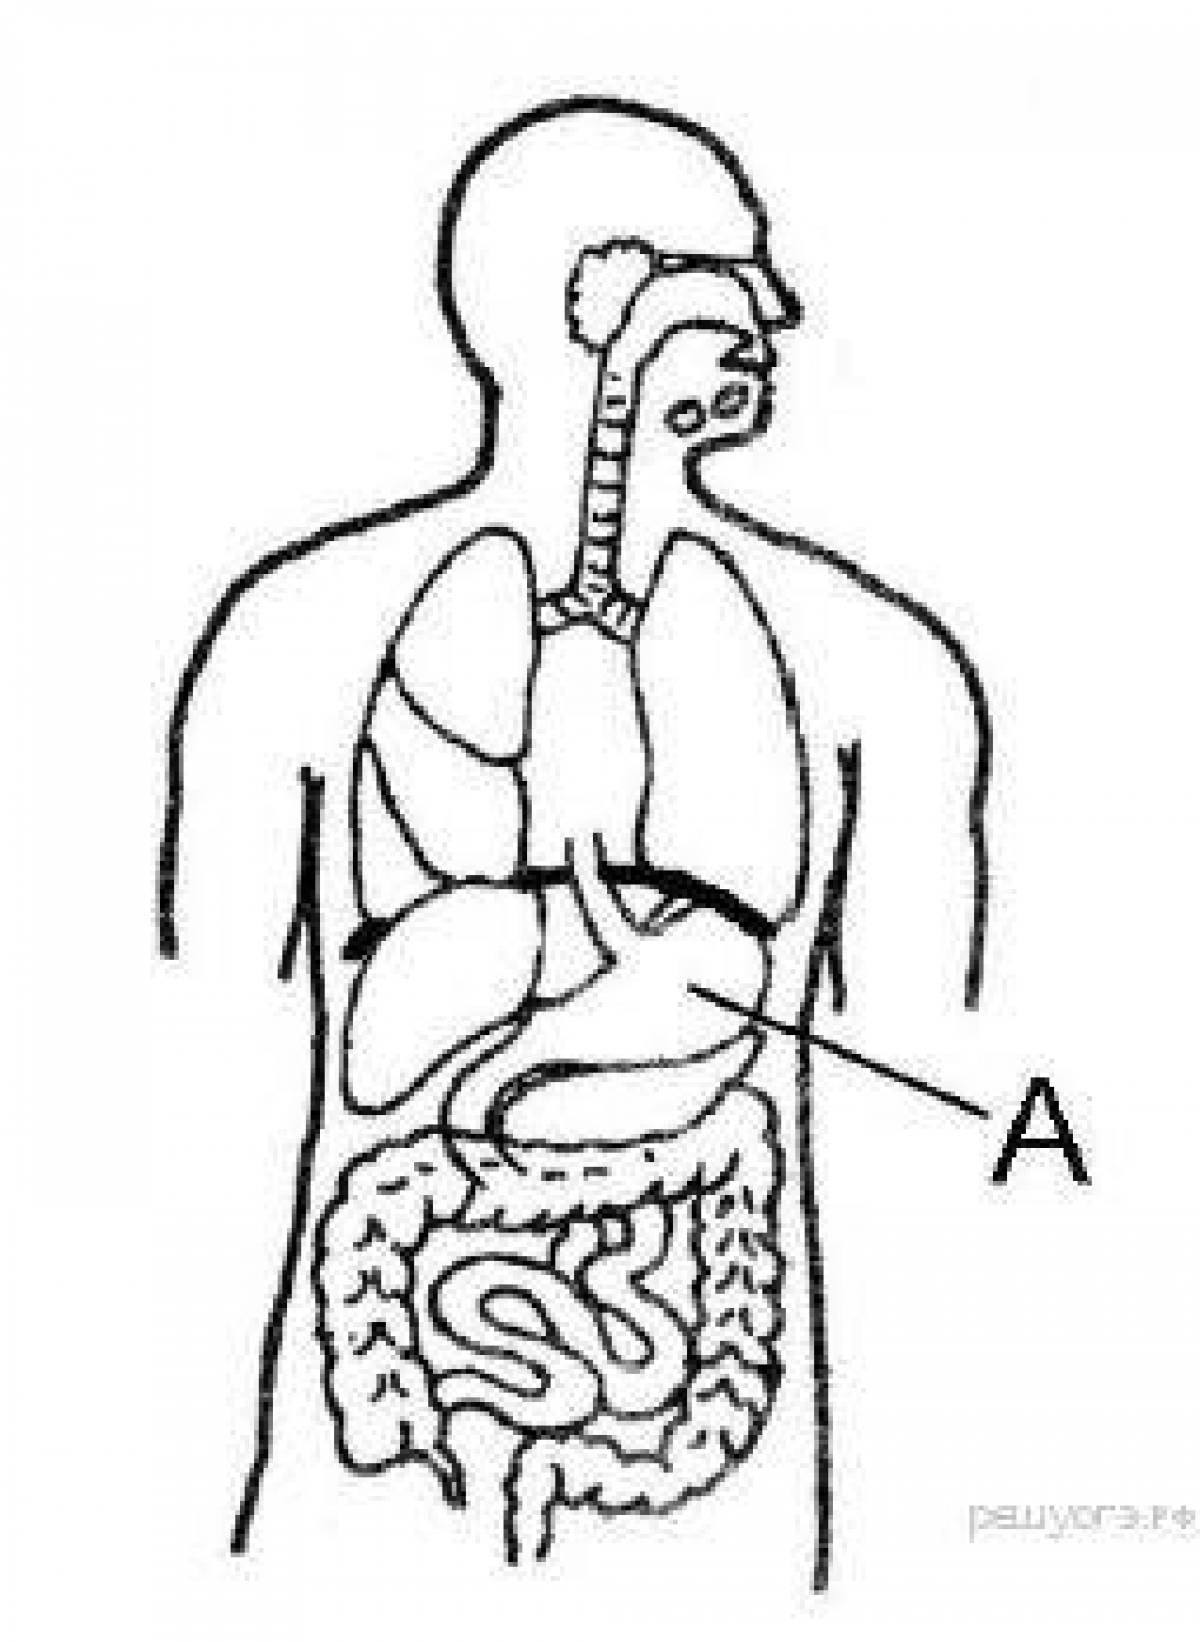 The internal structure of a person Grade 2 #4